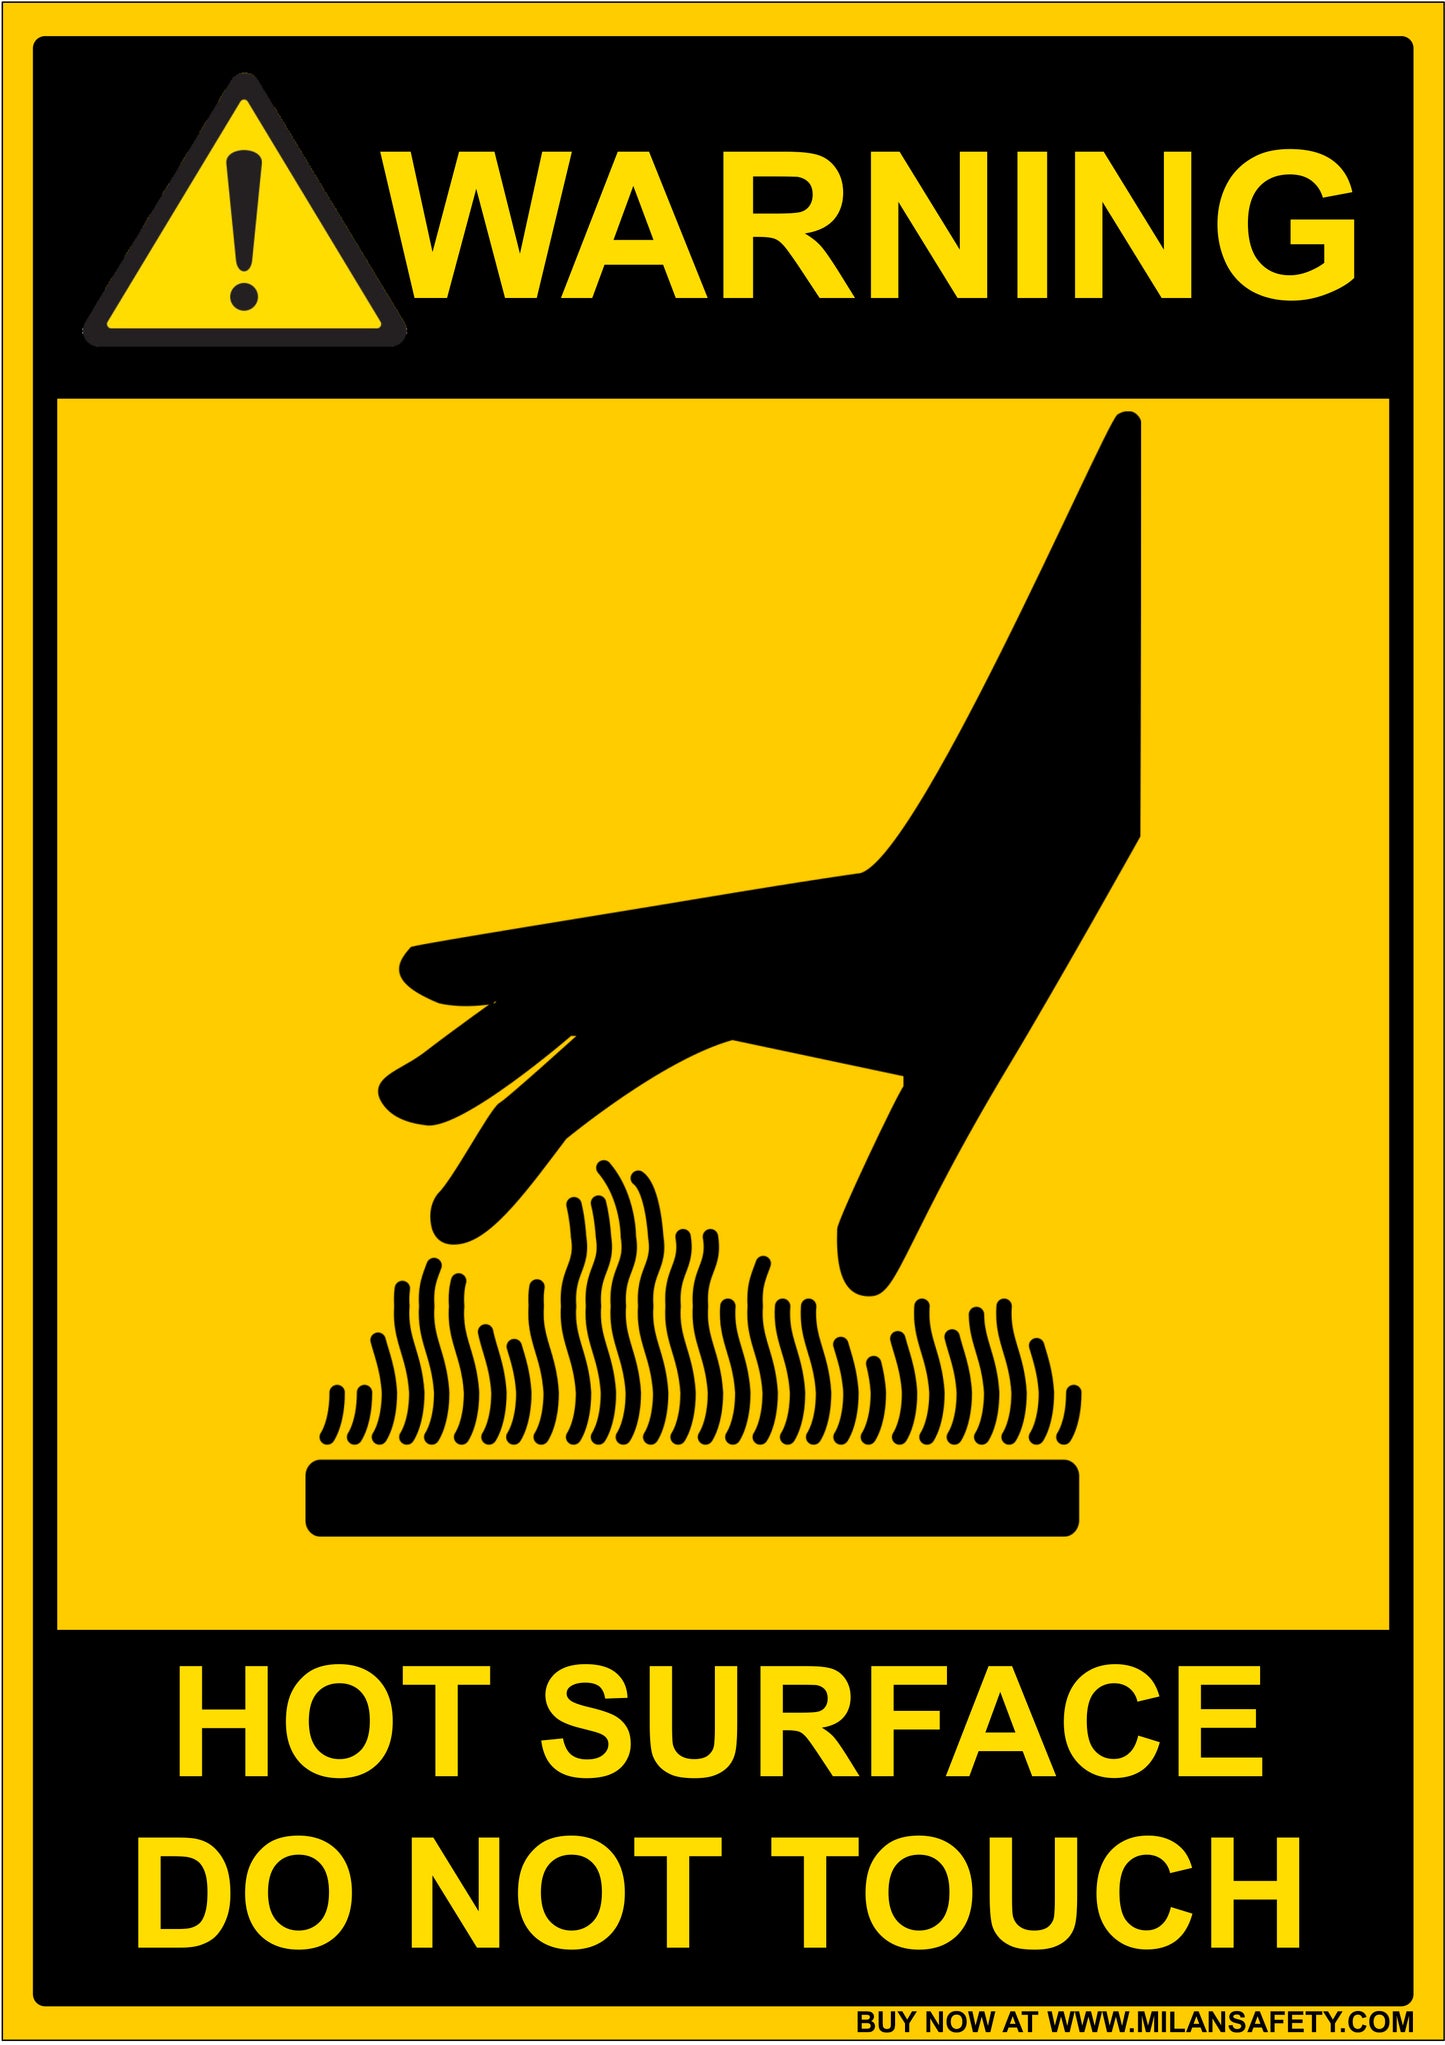 Warning hot surface do not touch signage